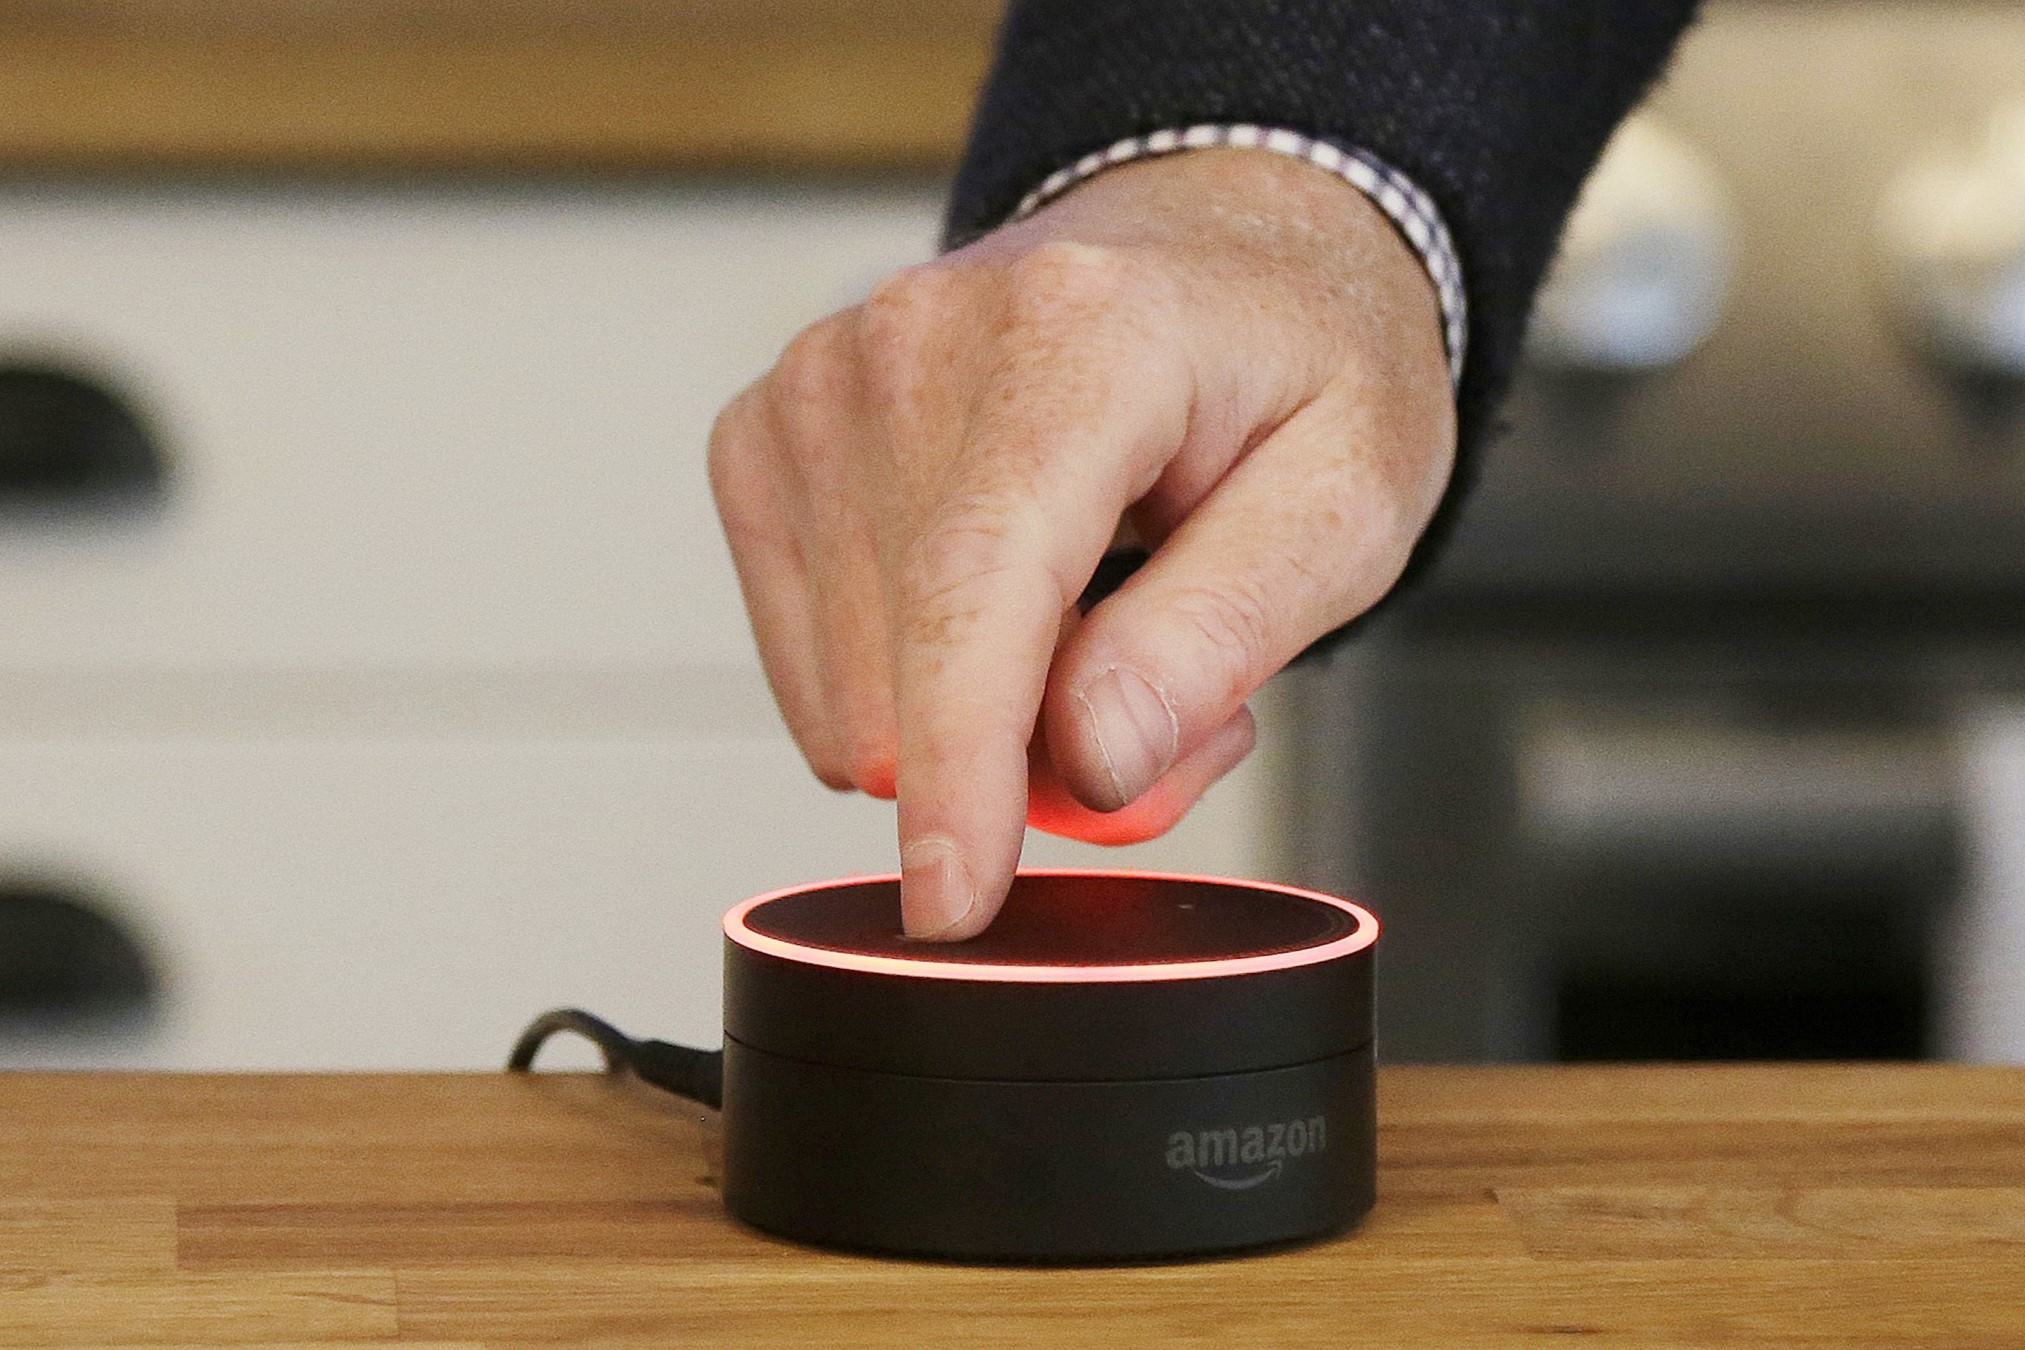 What Does The Amazon Echo Dot Do